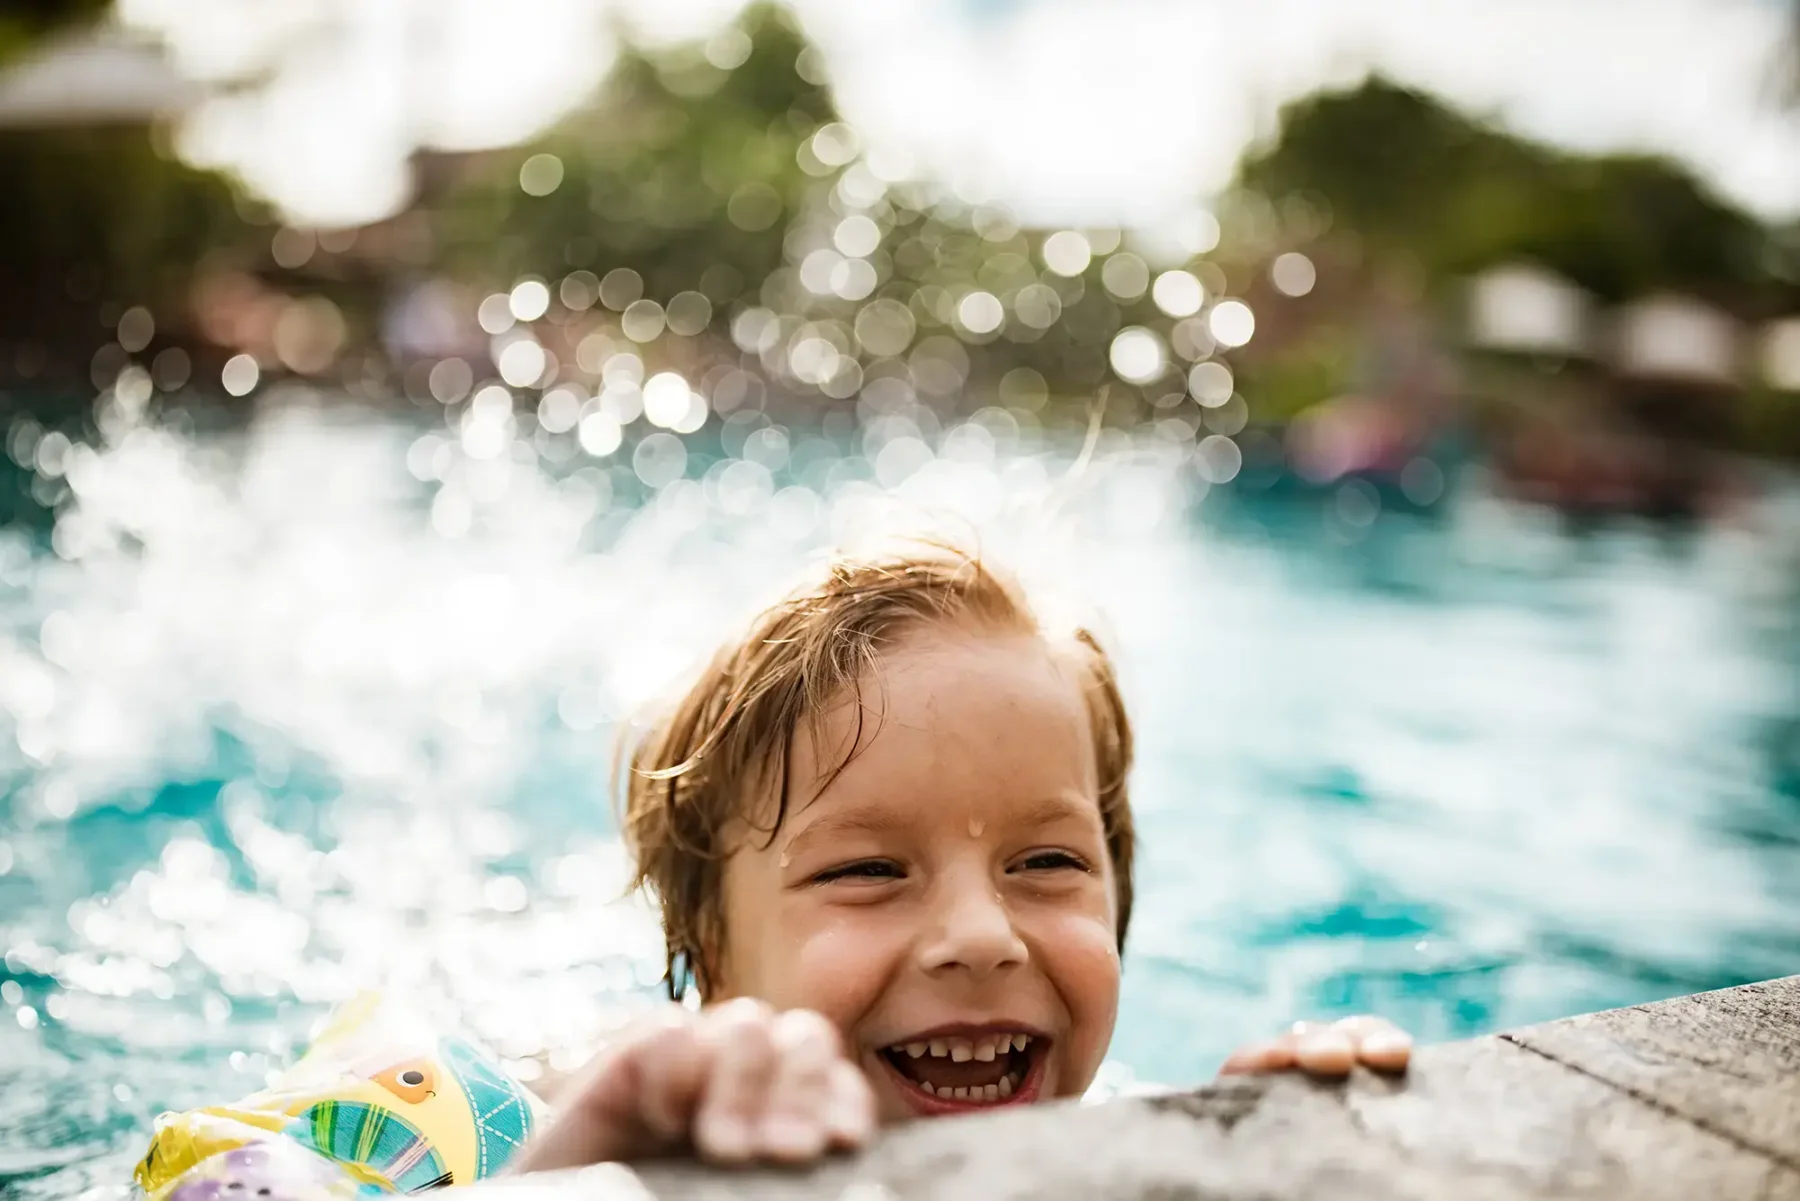 Young boy smiling and climbing out of a pool